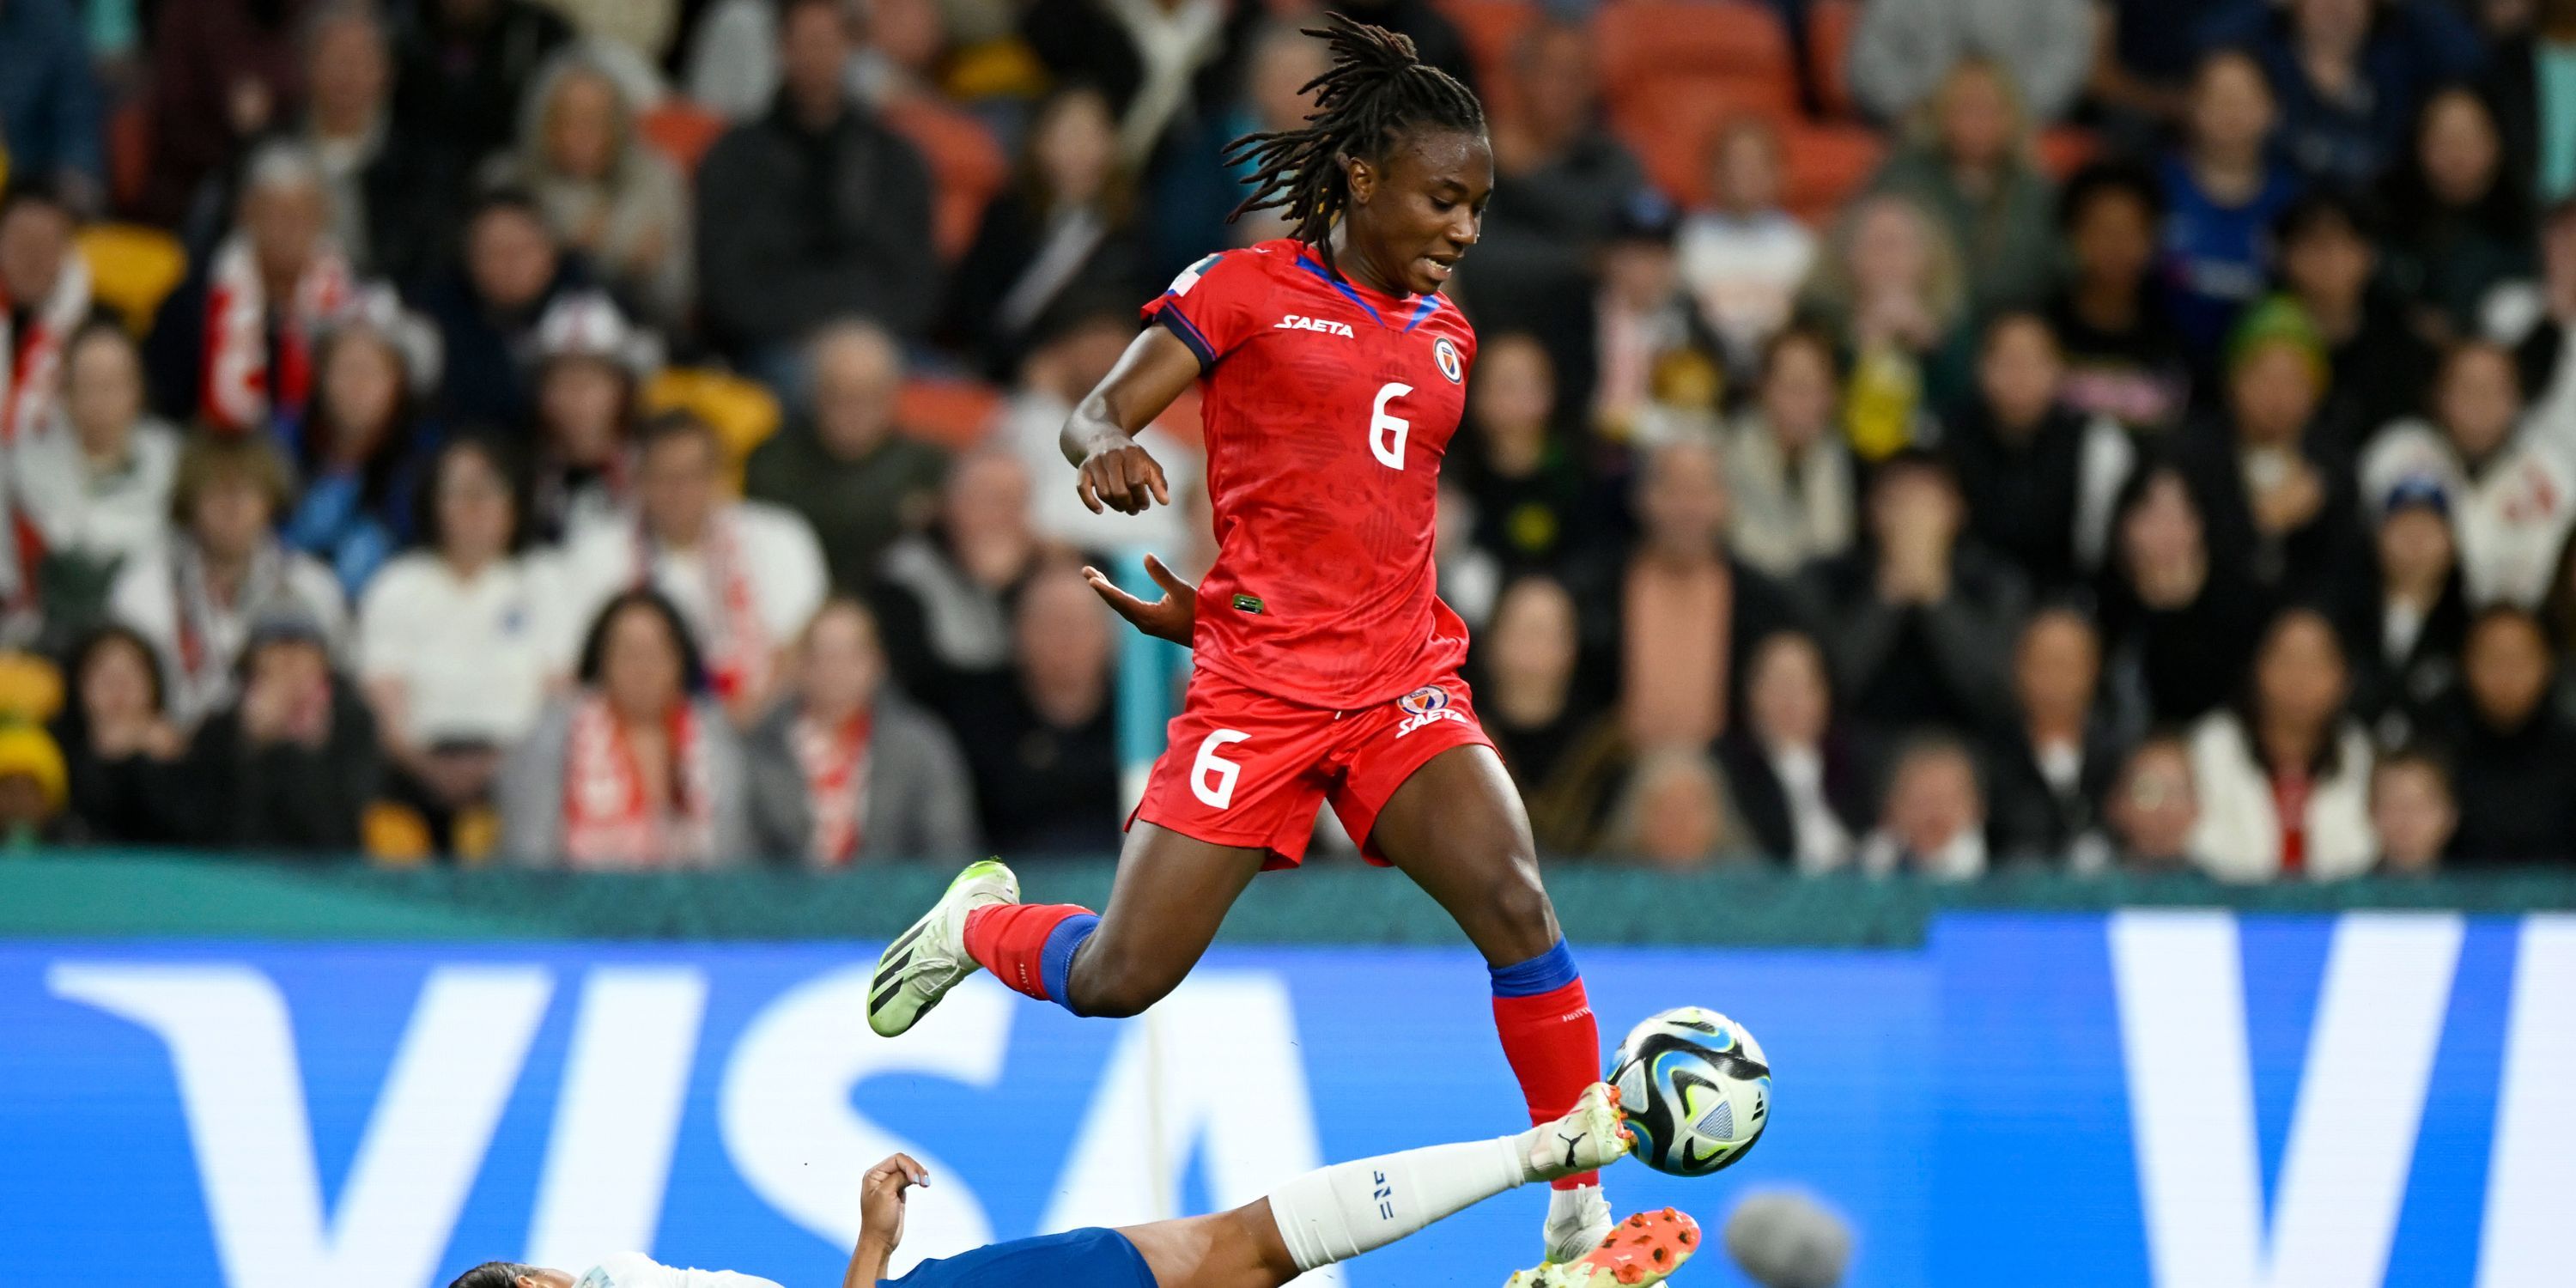 Melchie Dumornay at the Women's World Cup